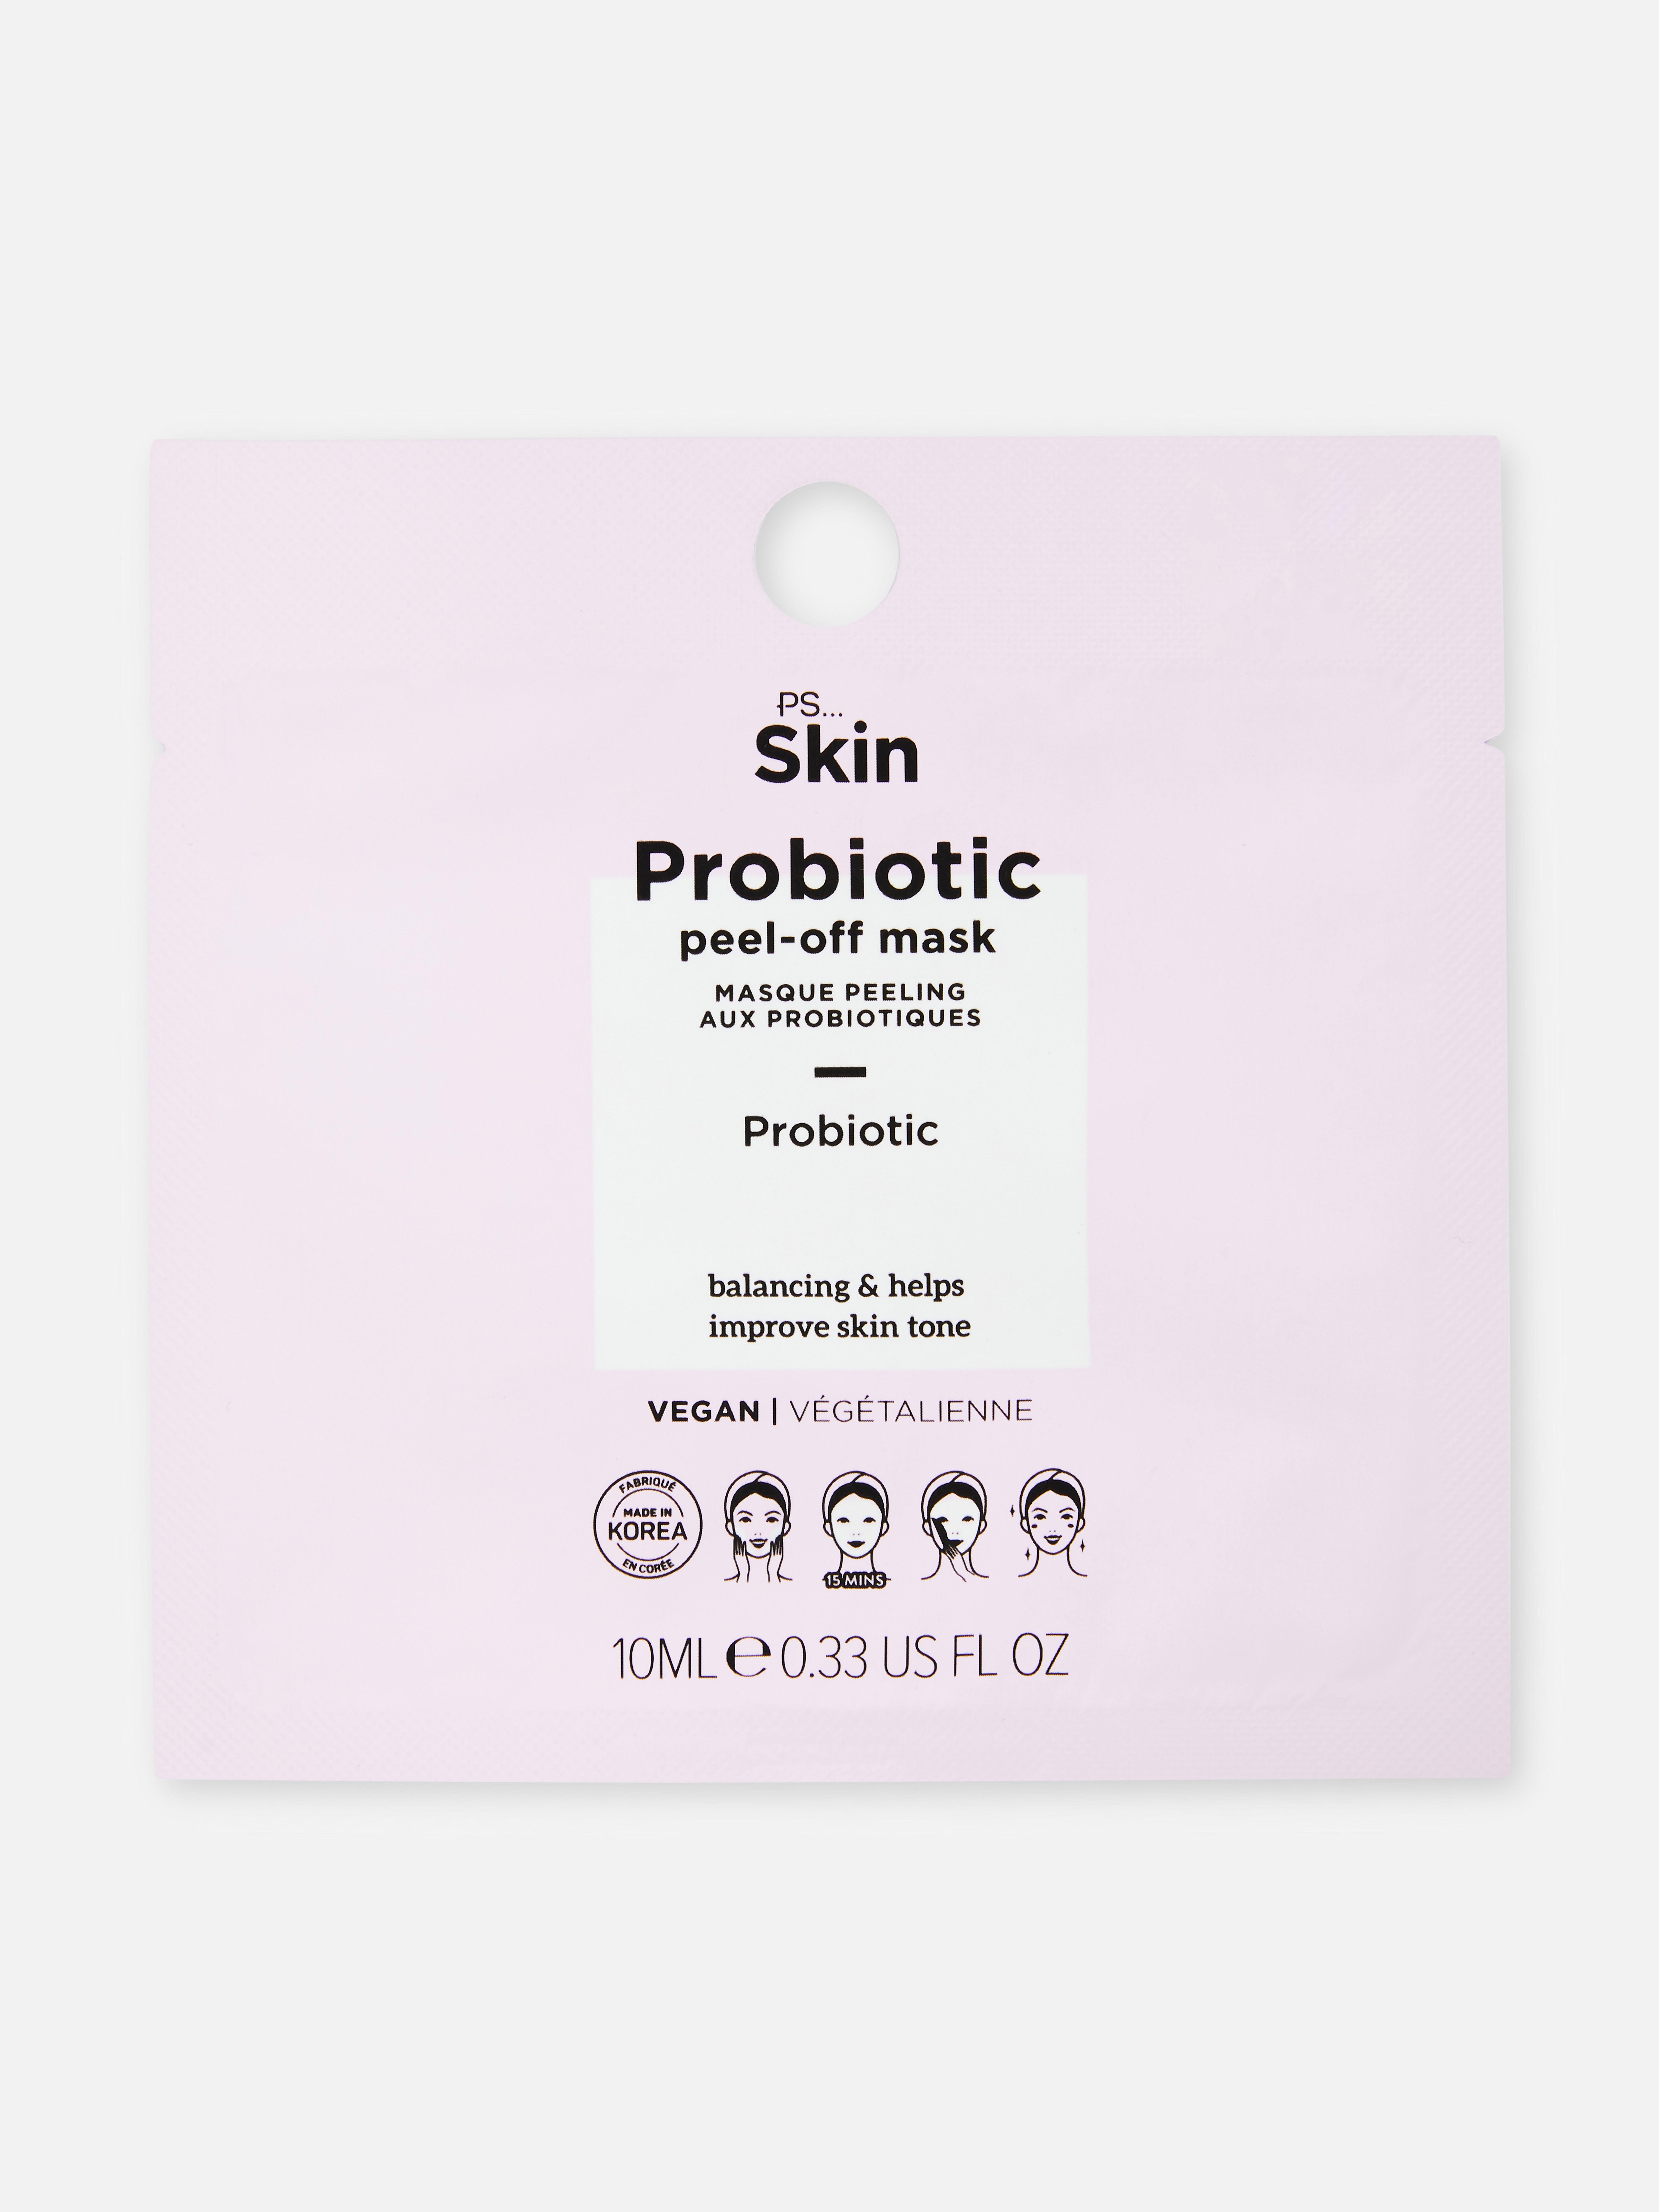 PS… Probiotic Face Mask